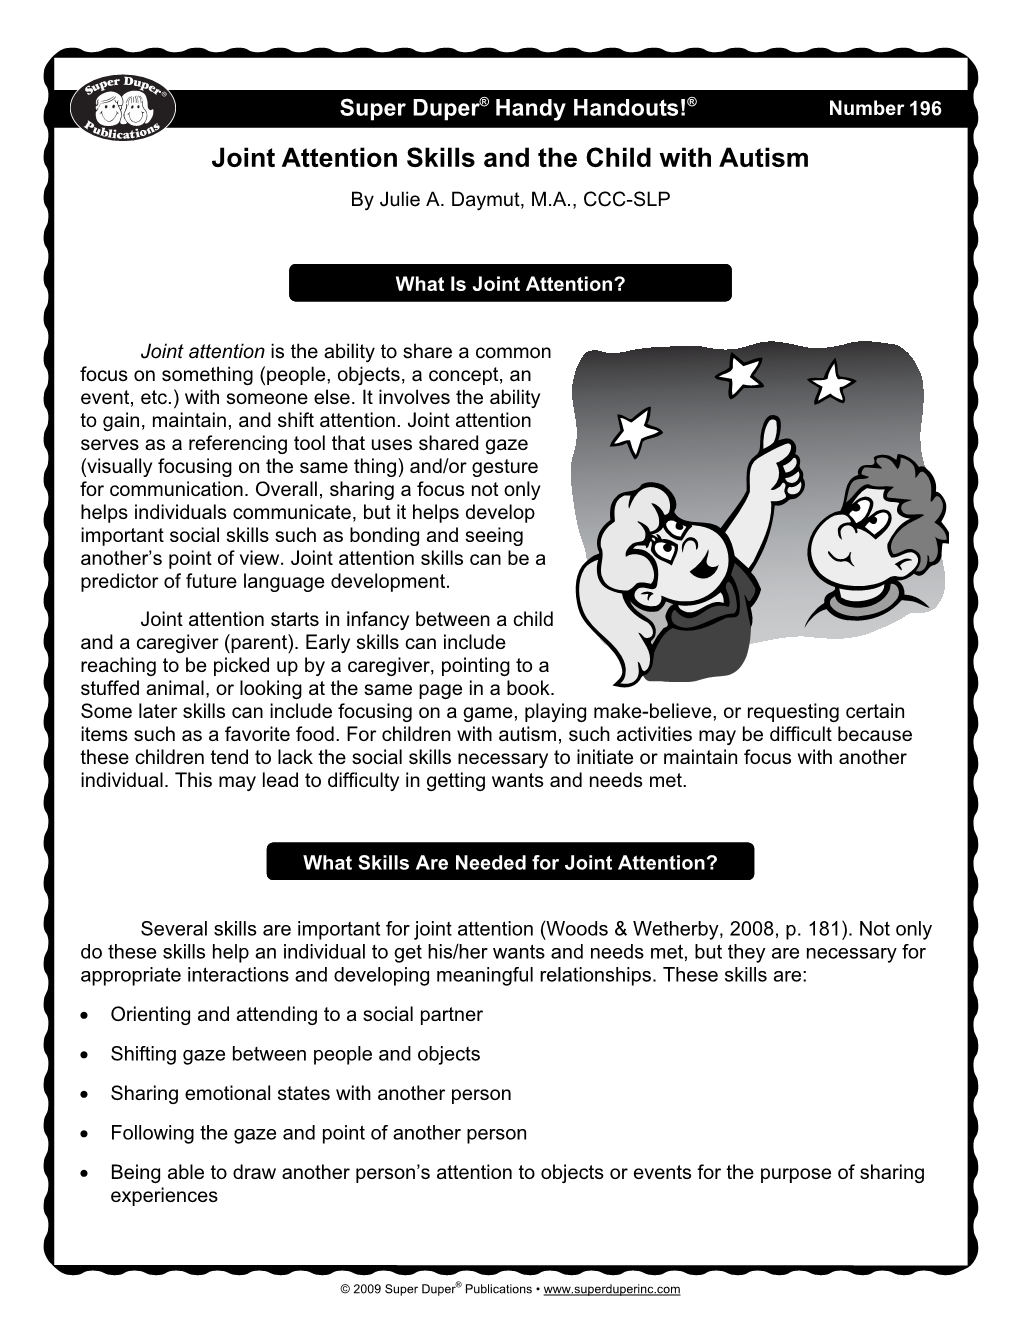 Joint Attention Skills and the Child with Autism by Julie A